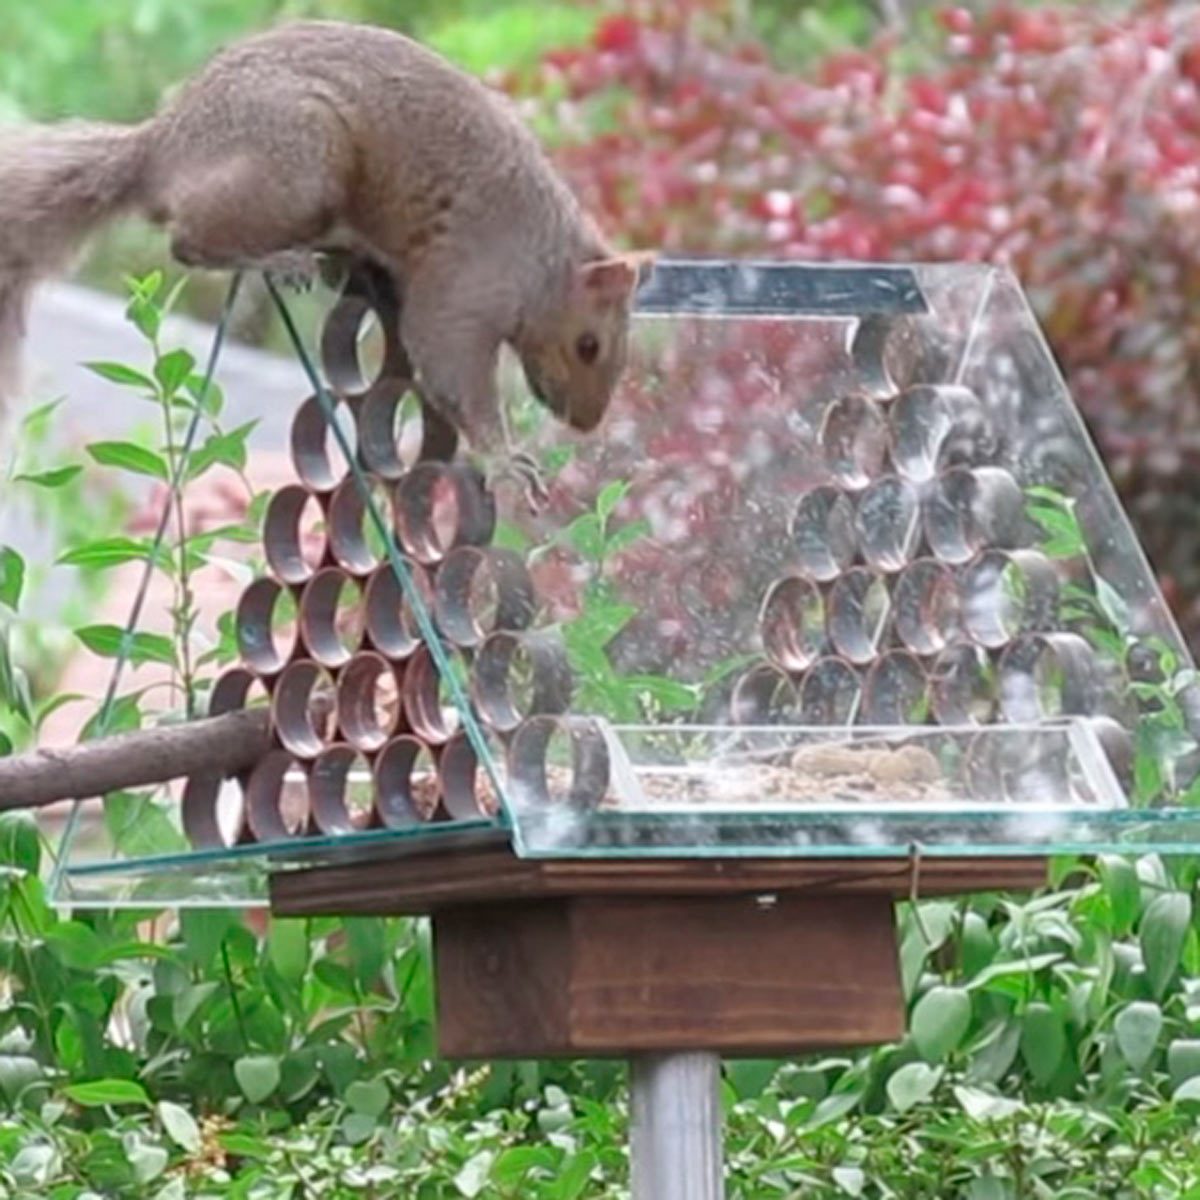 10 Favorite Attempts at Preventing Squirrels from Reaching Bird Feeders